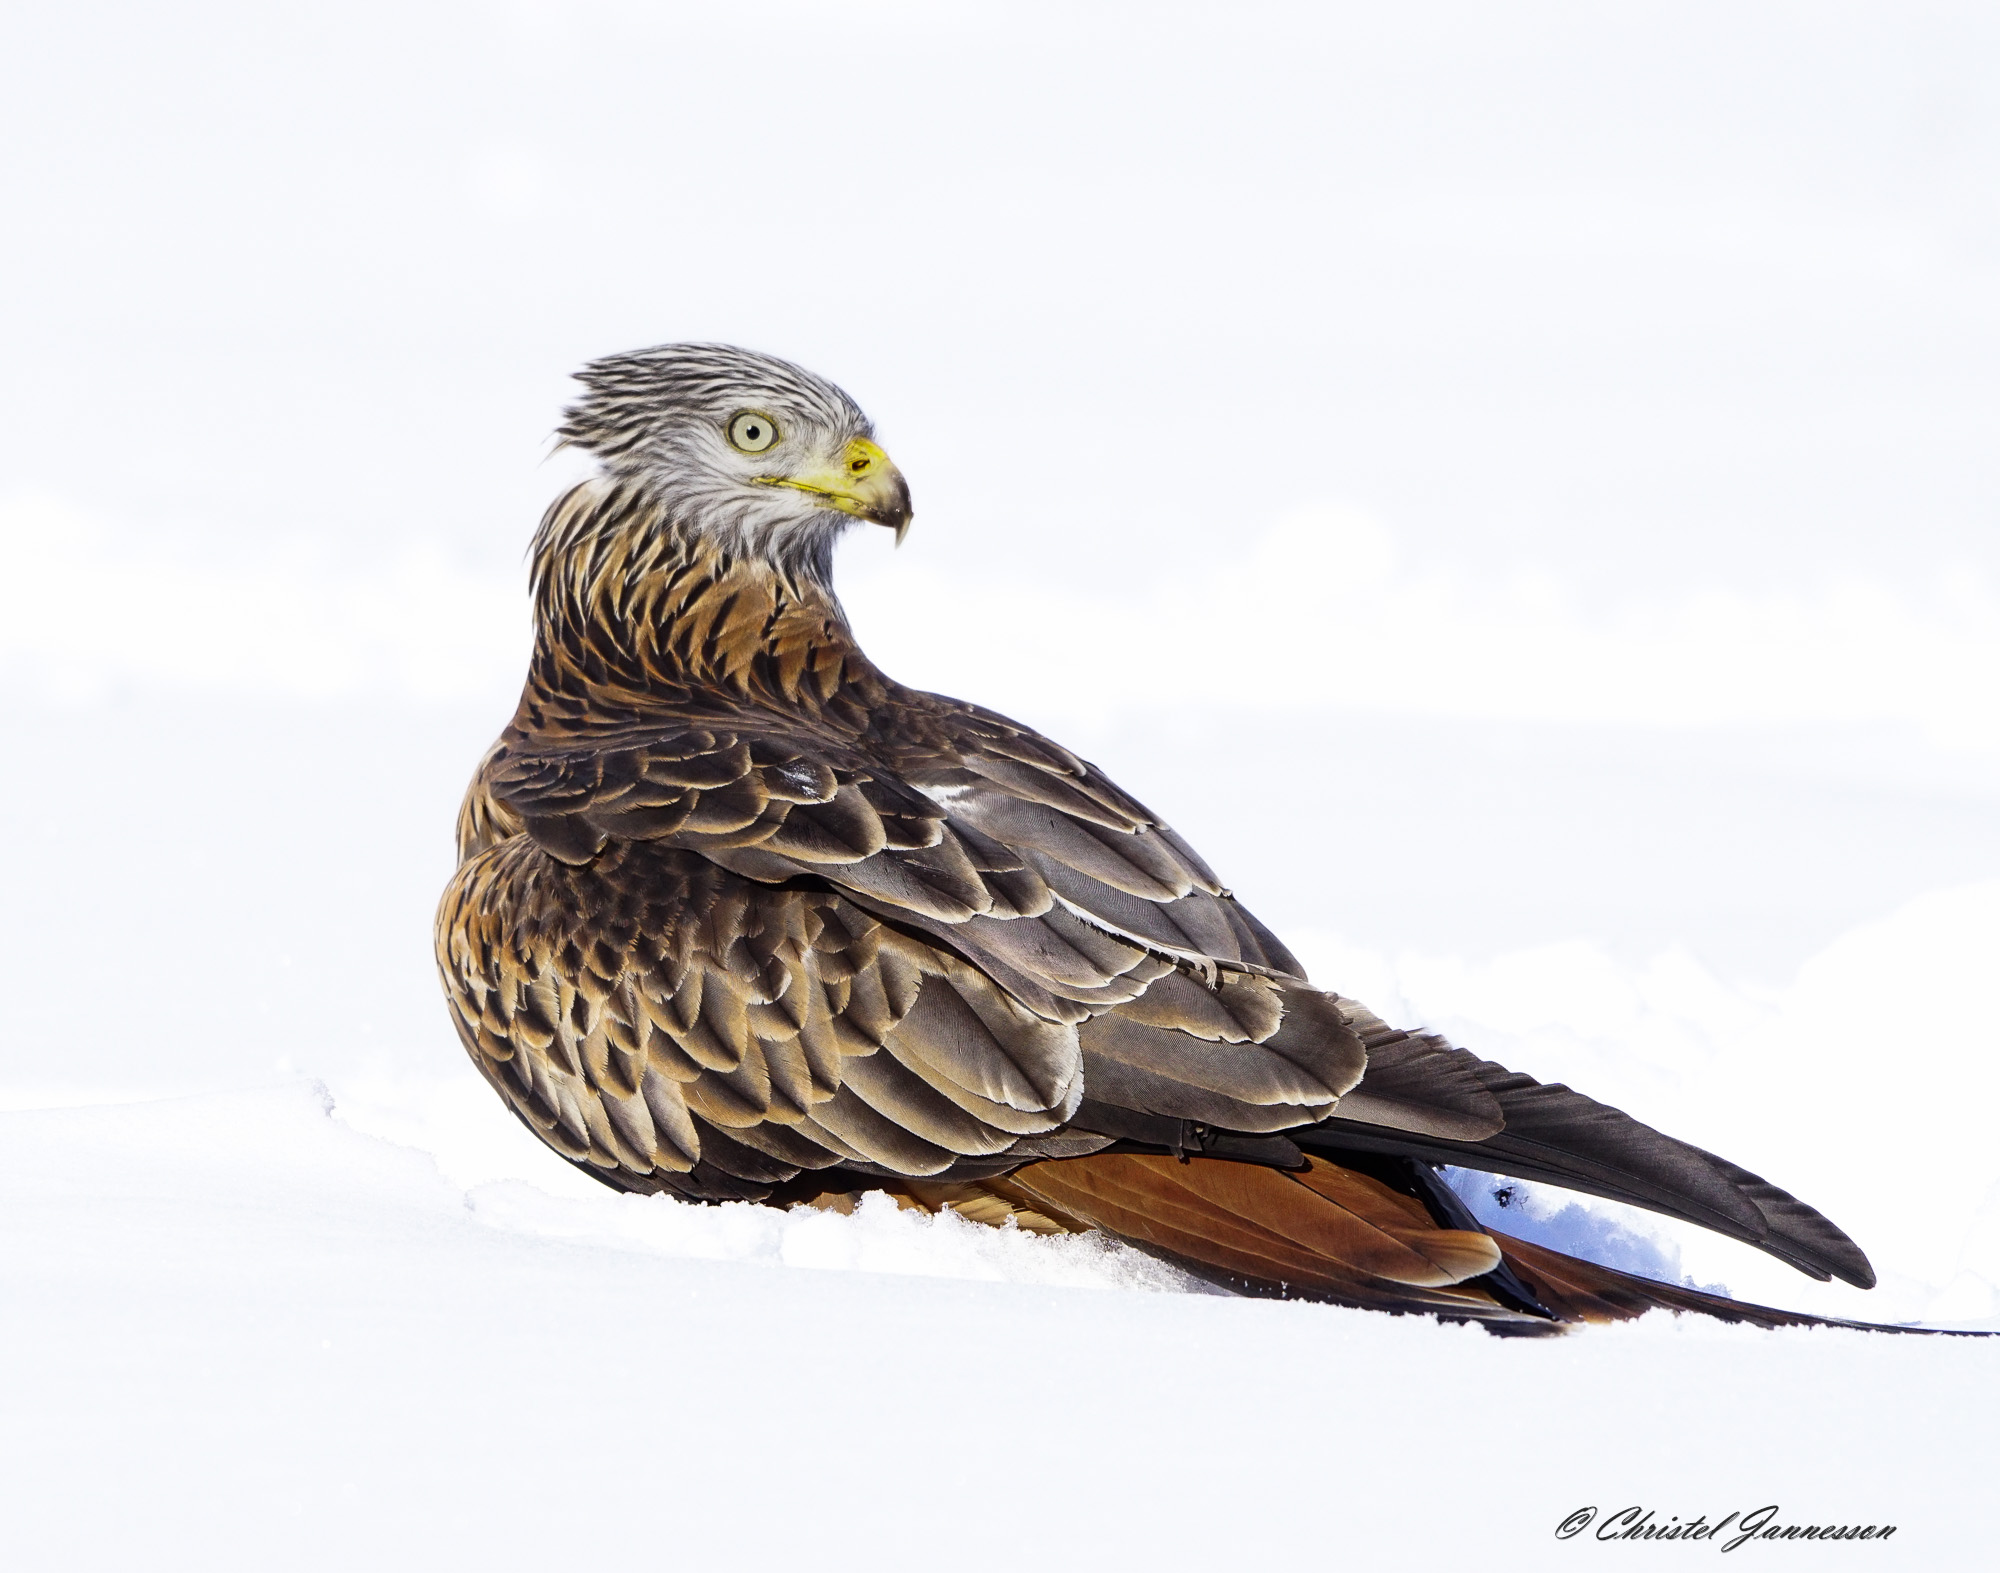 Red Kite - like a palette in the snow...